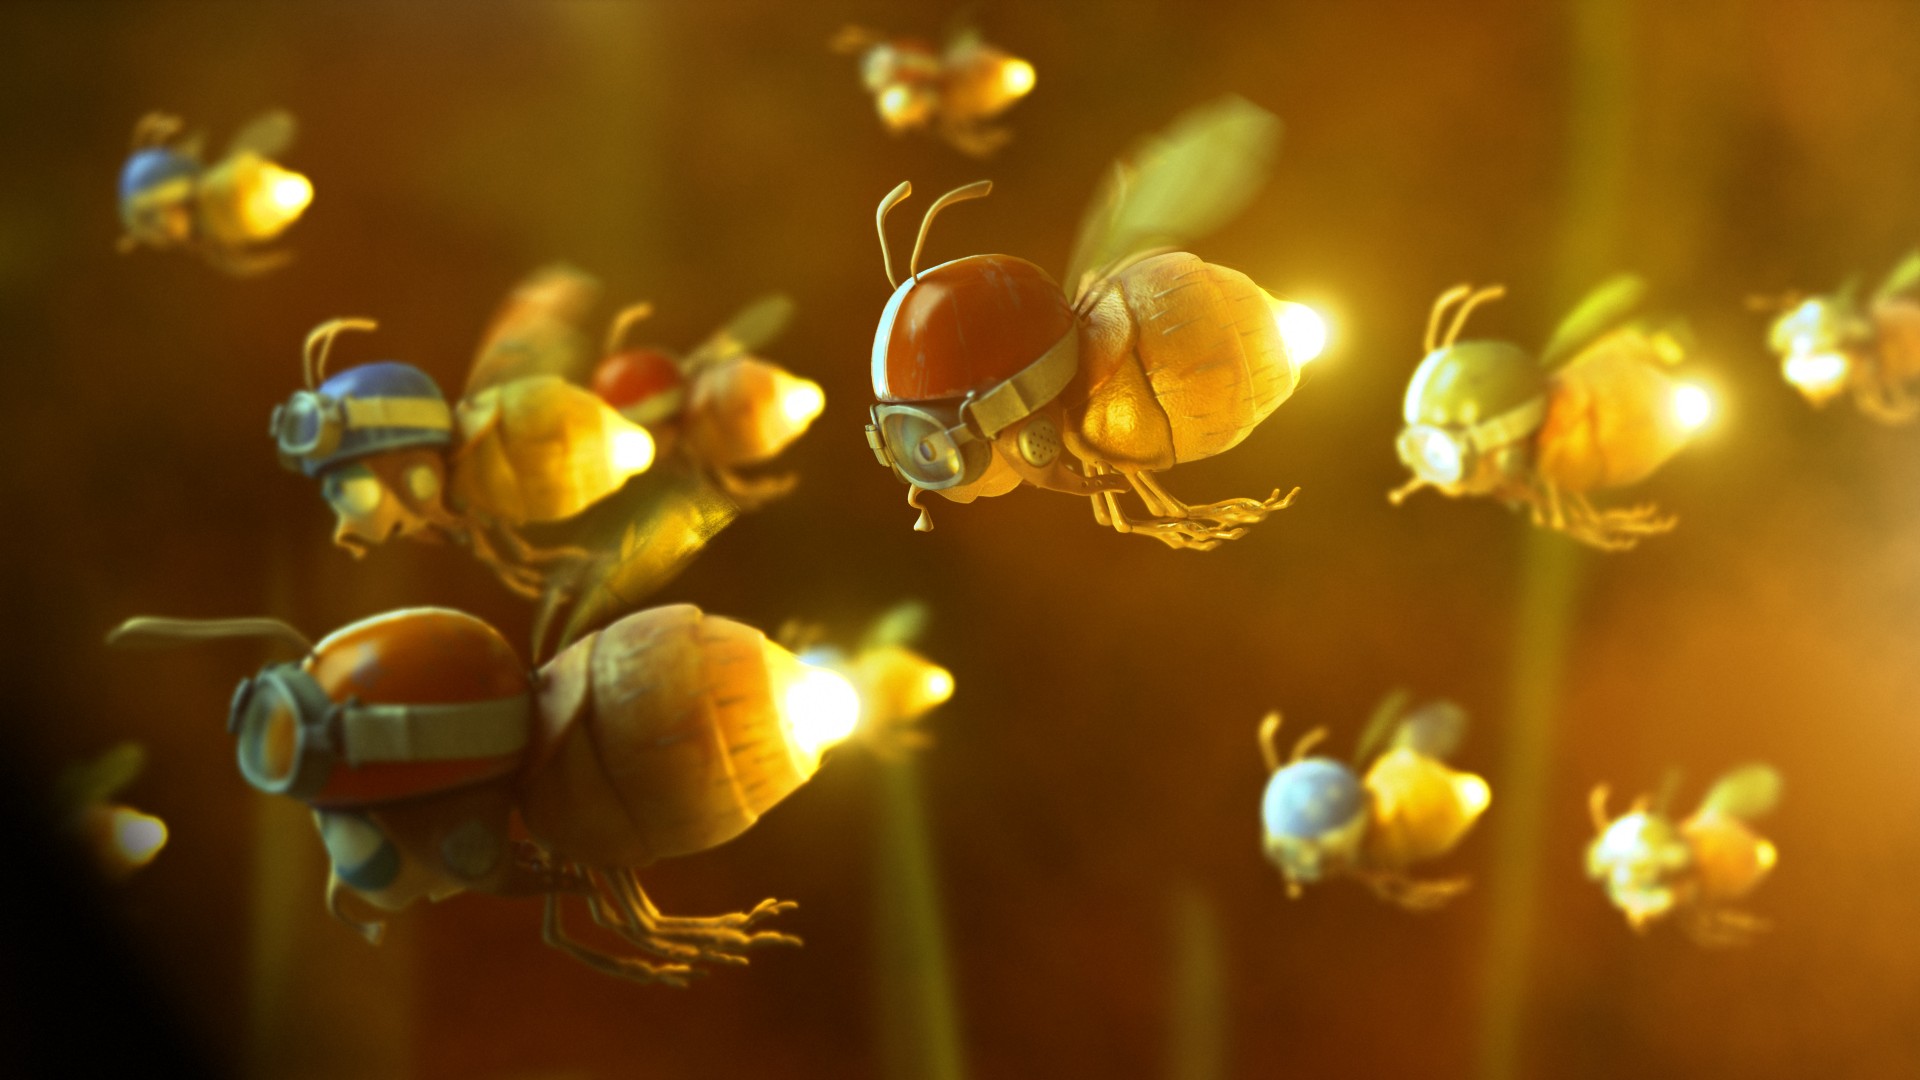 humor, Insect, Firefly, Googles, Mask, Wings, Cute, Flight, Fly Wallpaper